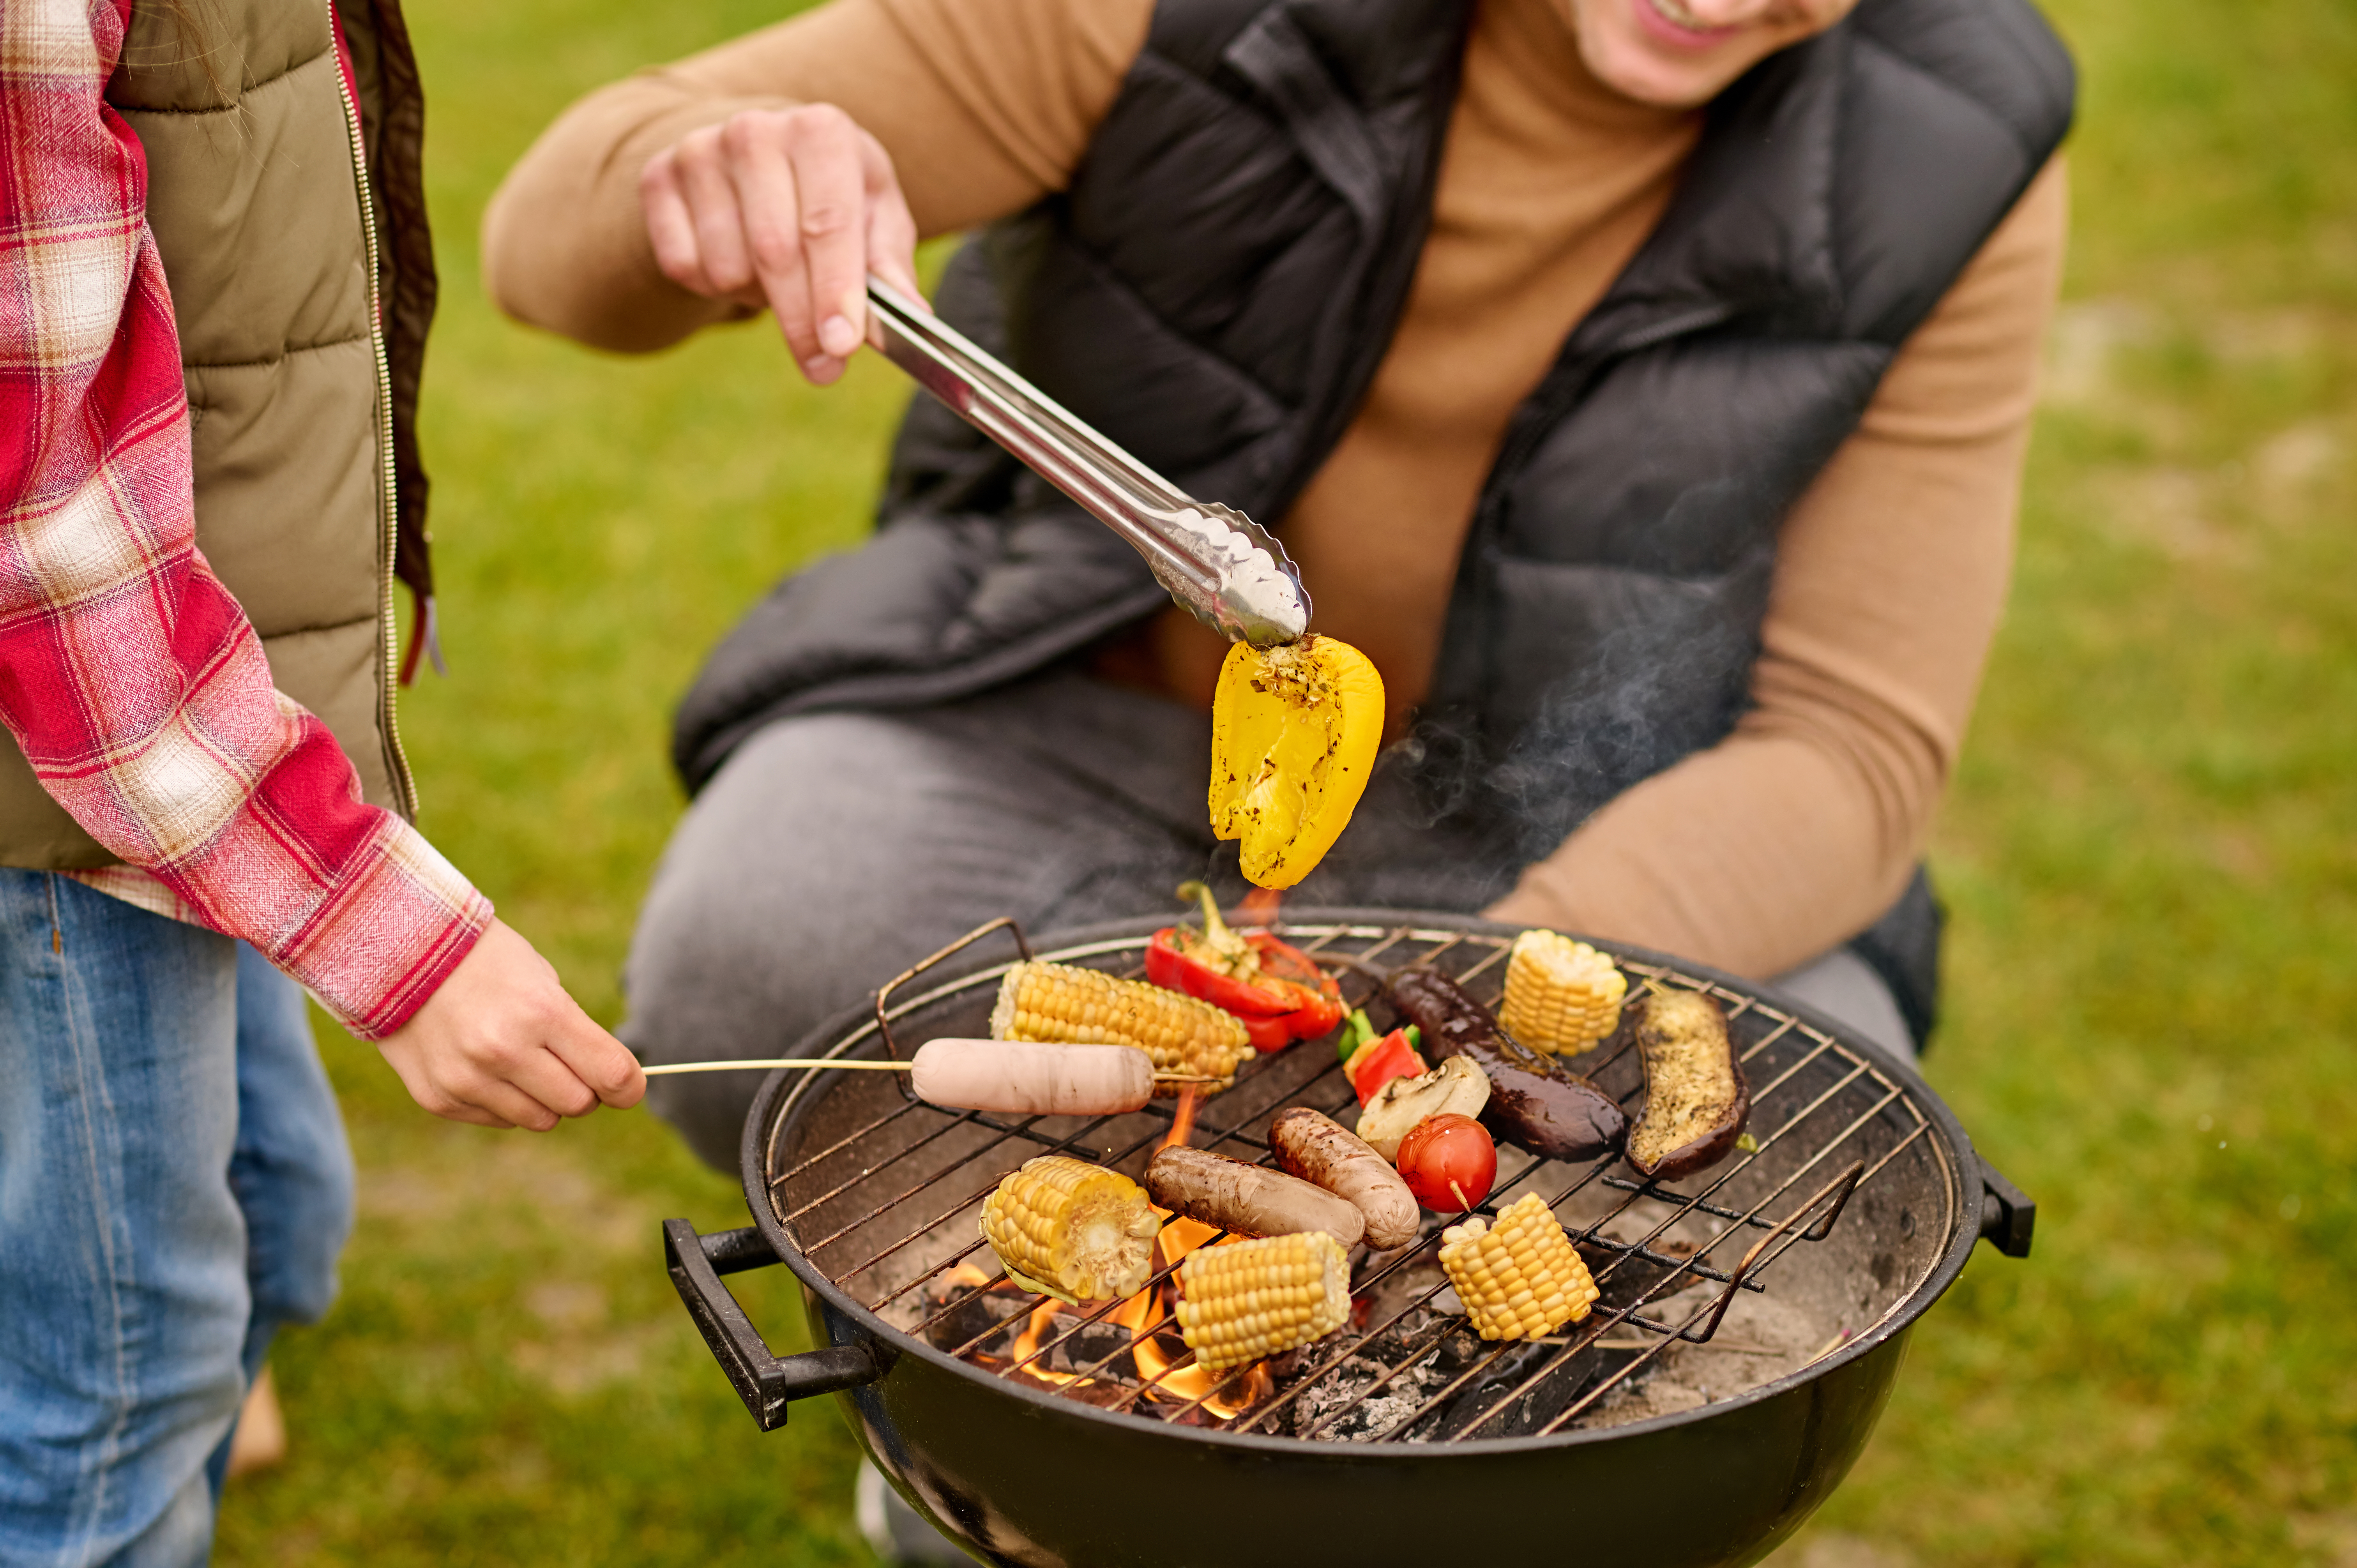 Man crouched near barbecue with vegetables